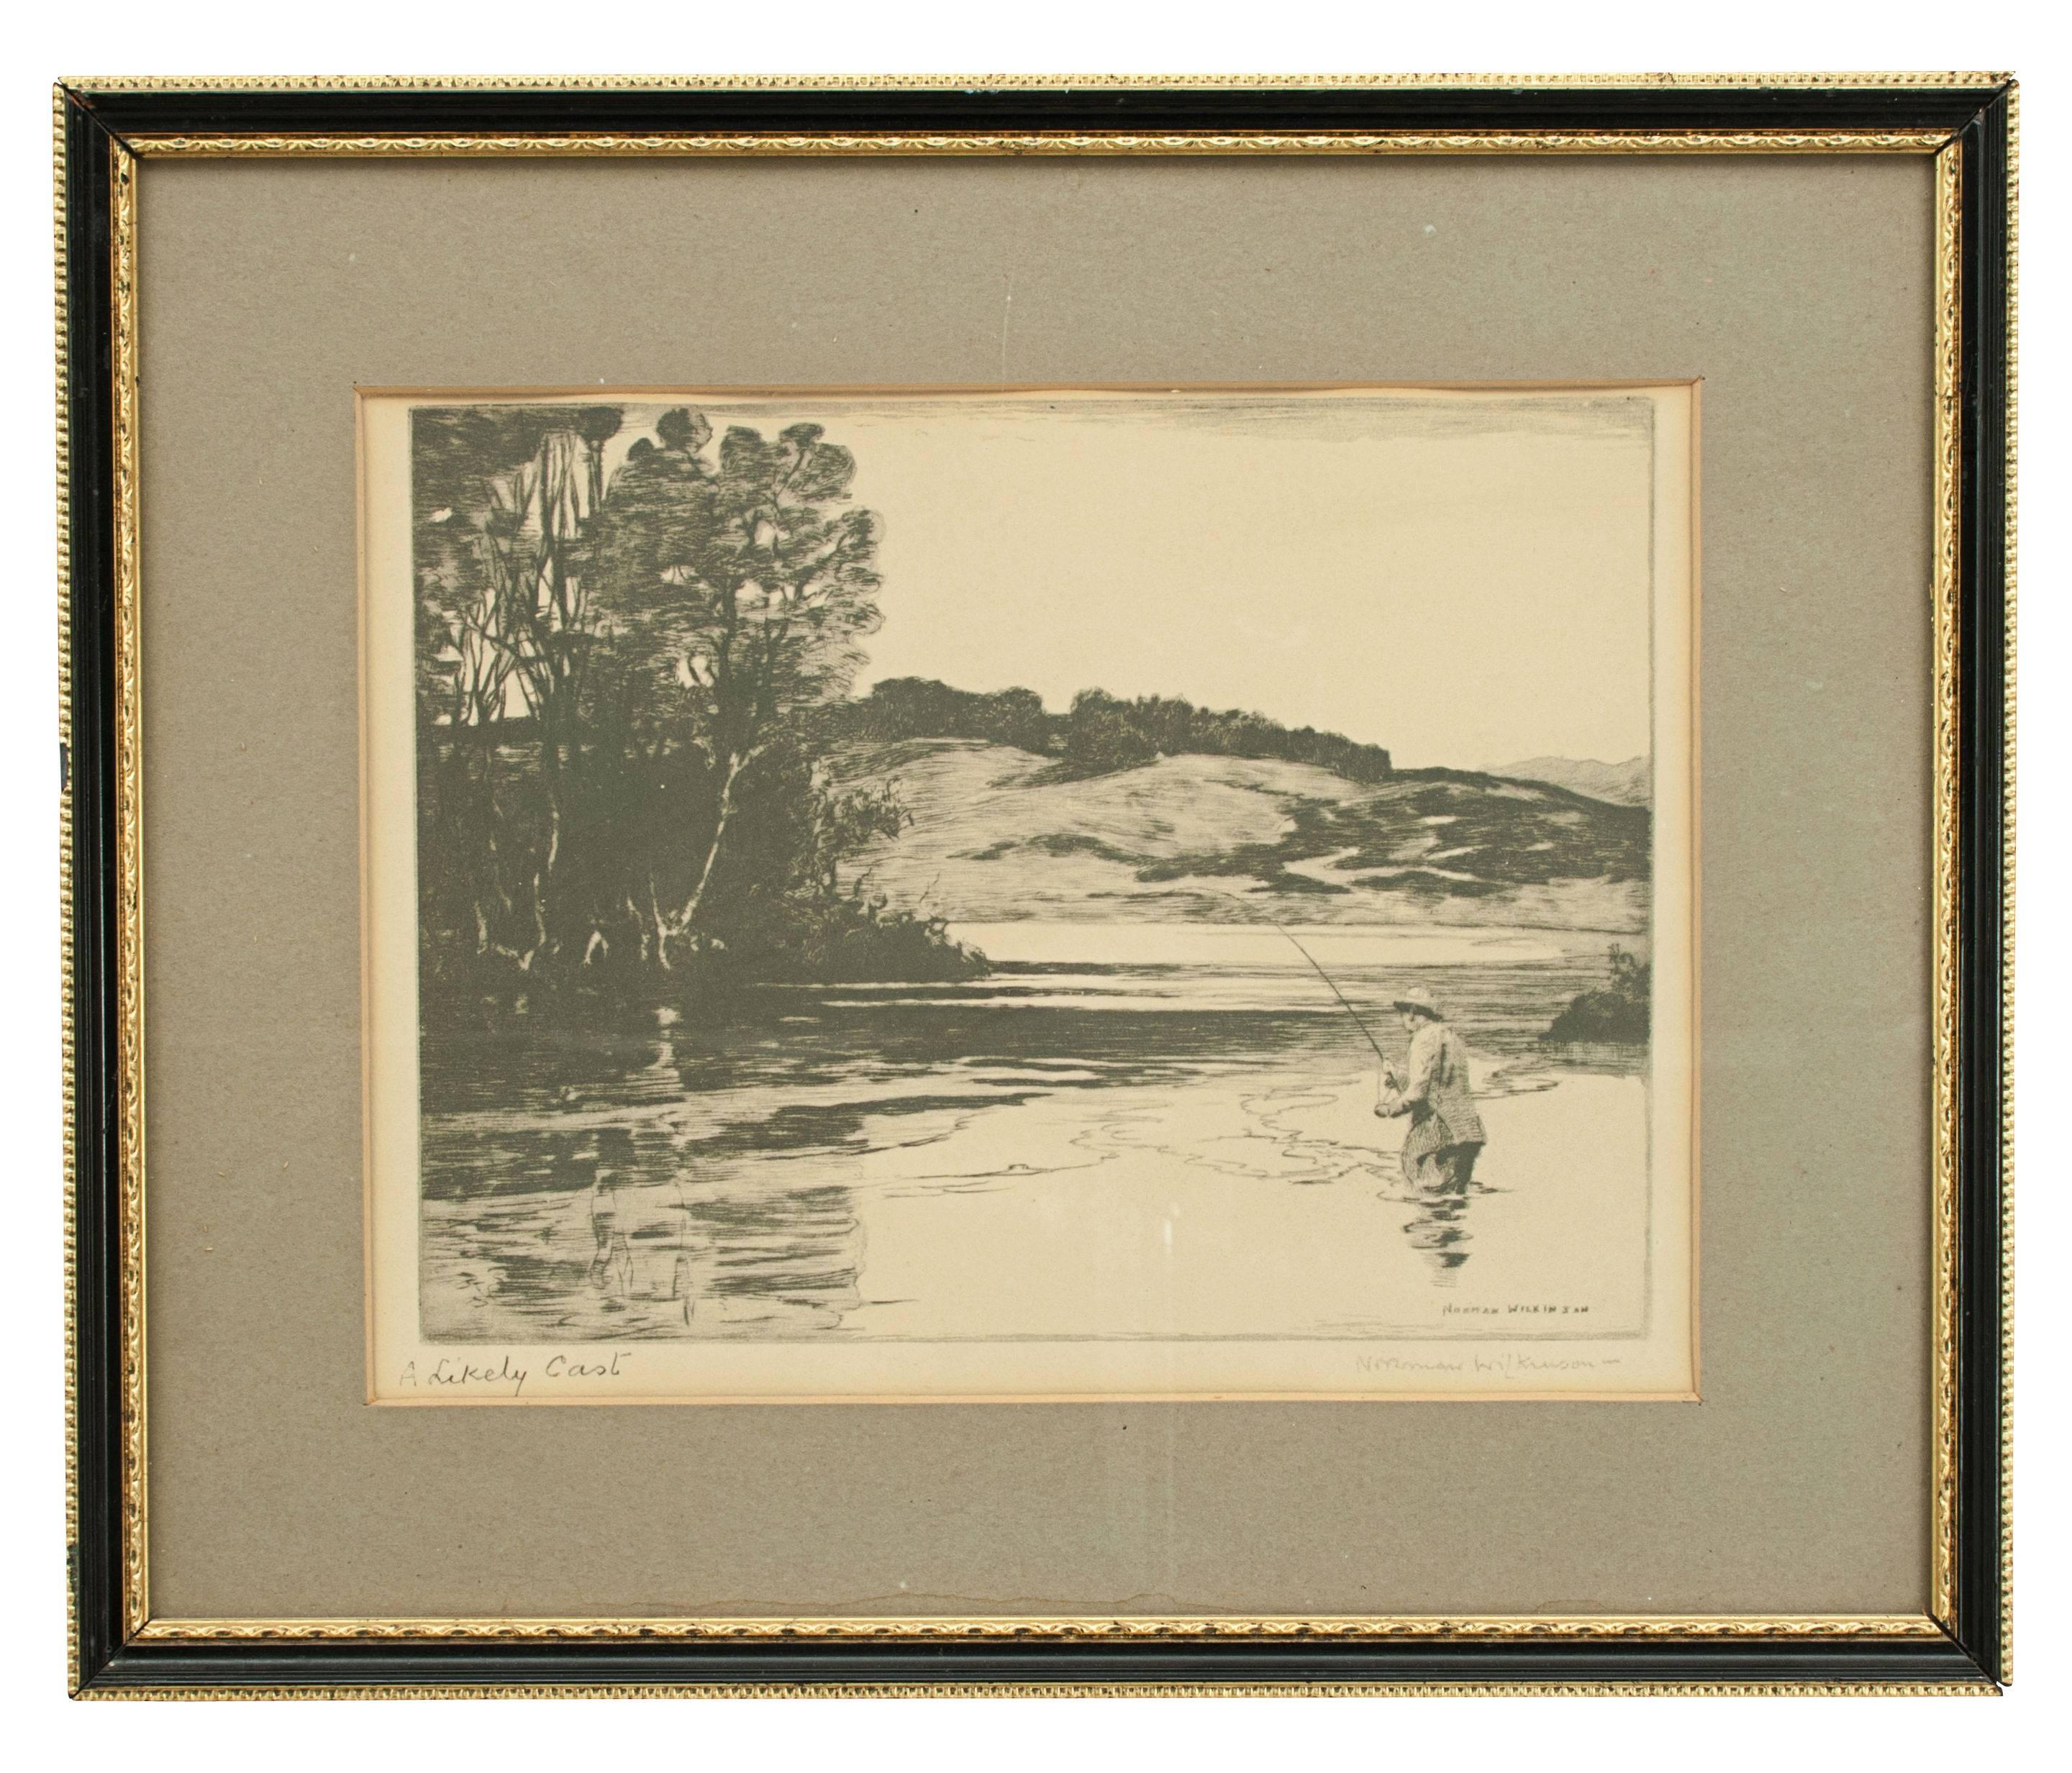 Set of six fishing pictures by Norman Wilkinson. 
Six black and white fishing illustrations by Norman Wilkinson. The fishing prints are titled 01 - Up The Fall, 02 - The Bewitched Pool. River Orchy, 03 - A Likely Catch, 04 - An Anglers Paradise, 05